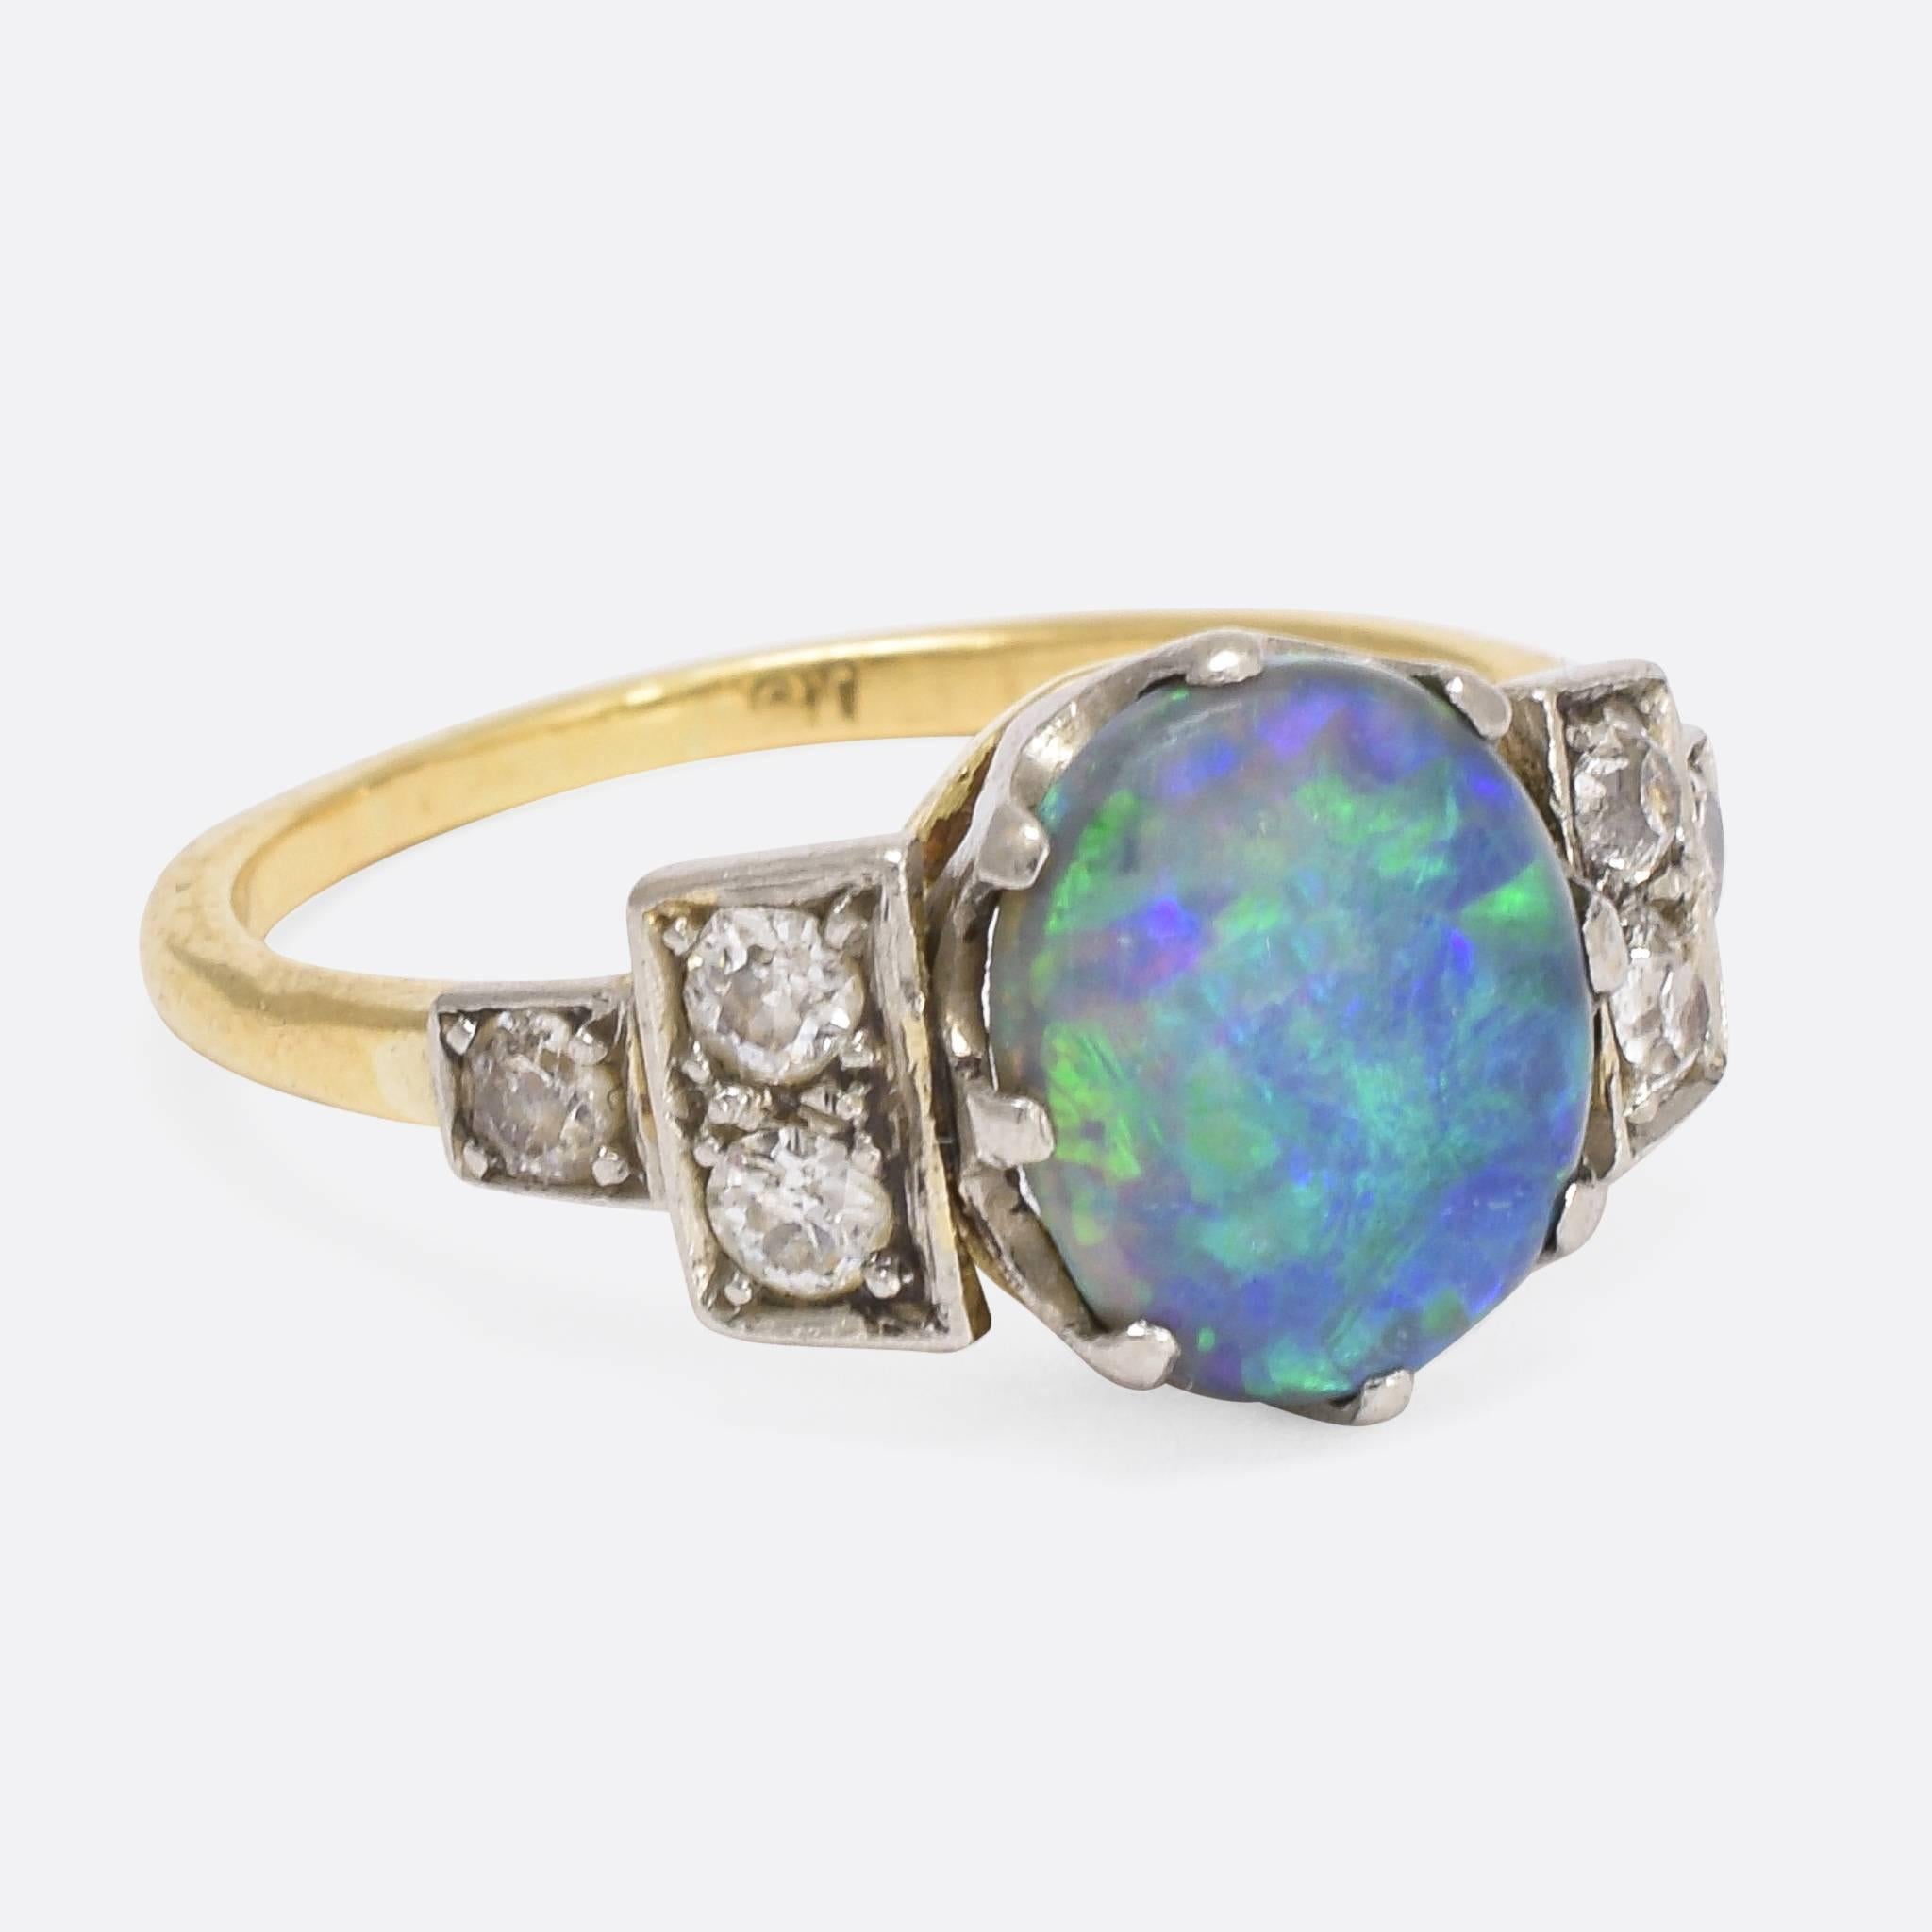 This superb Black Opal and Diamond ring was made in the Art Deco era, c.1930. The vibrant central stone displays deep blues, and flashes of green and purple - with old cut diamonds accenting the shoulders. An fine quality ring, full of character and